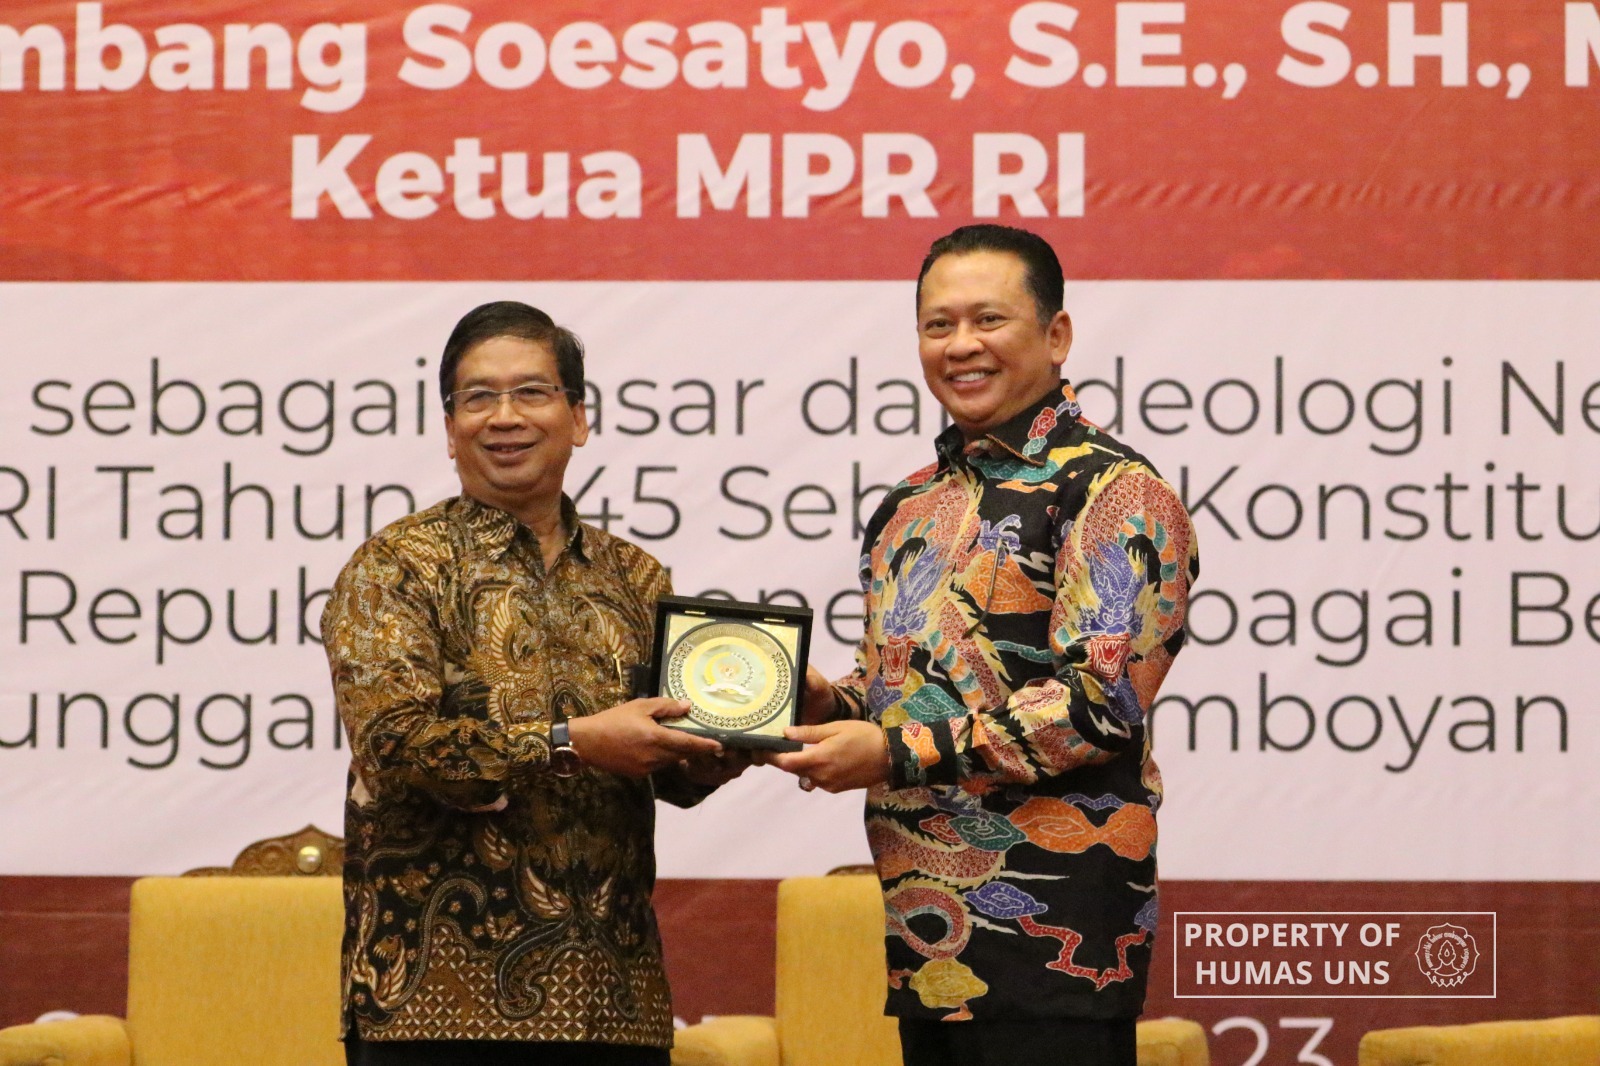 UNS Holds Socialization of MPR RI Four Pillars and Public Lecture Attended by Chairman of MPR RI